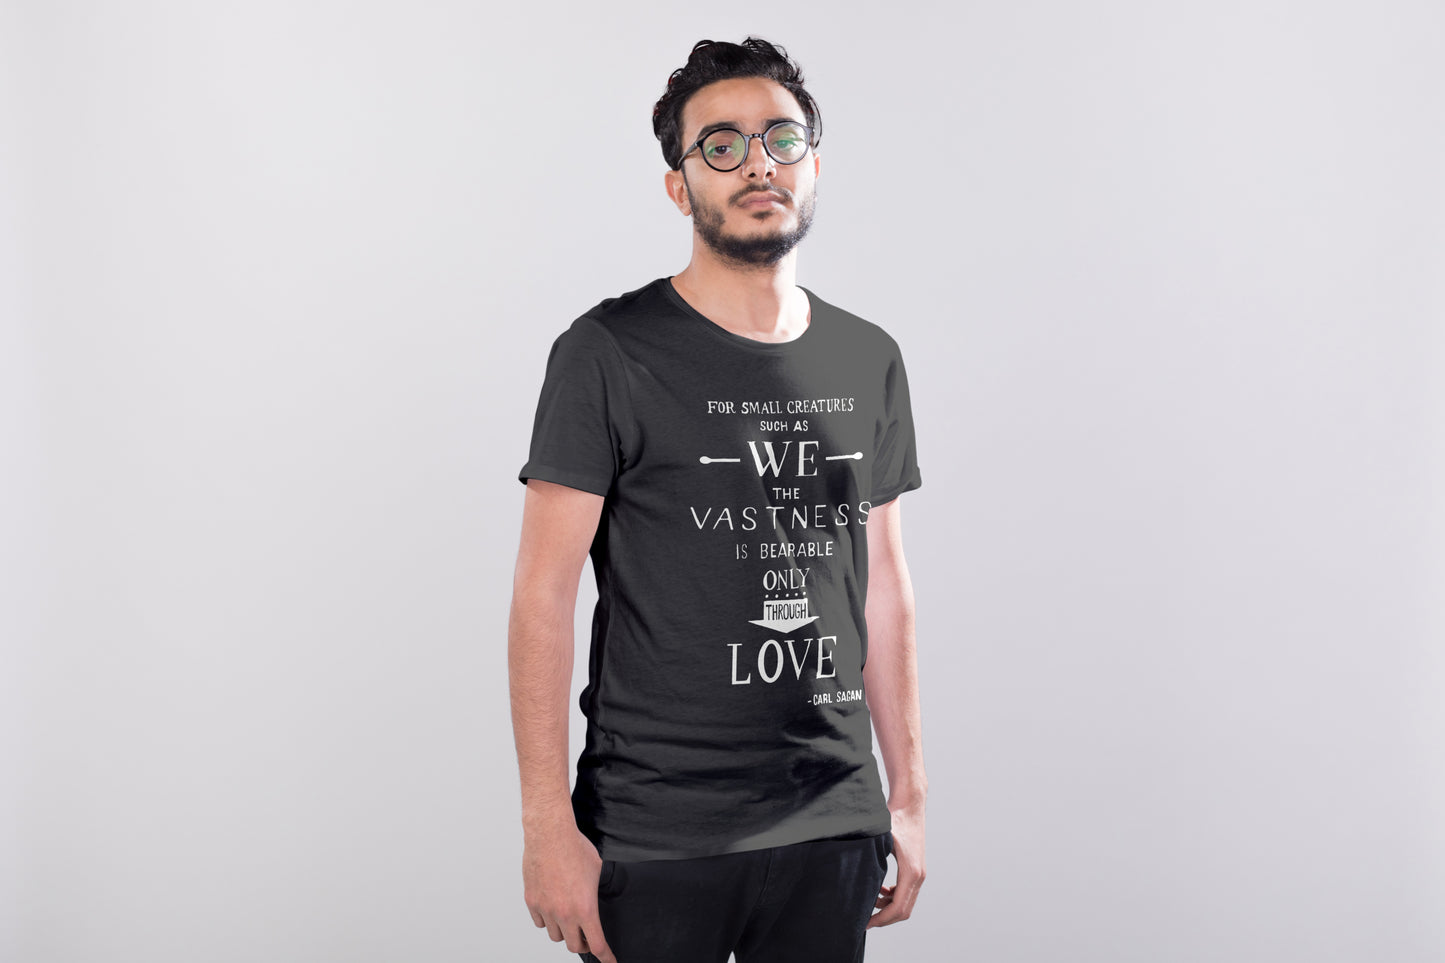 Only Through Love Carl Sagan Quote T-shirt, Science and Astronomy Graphic Tee